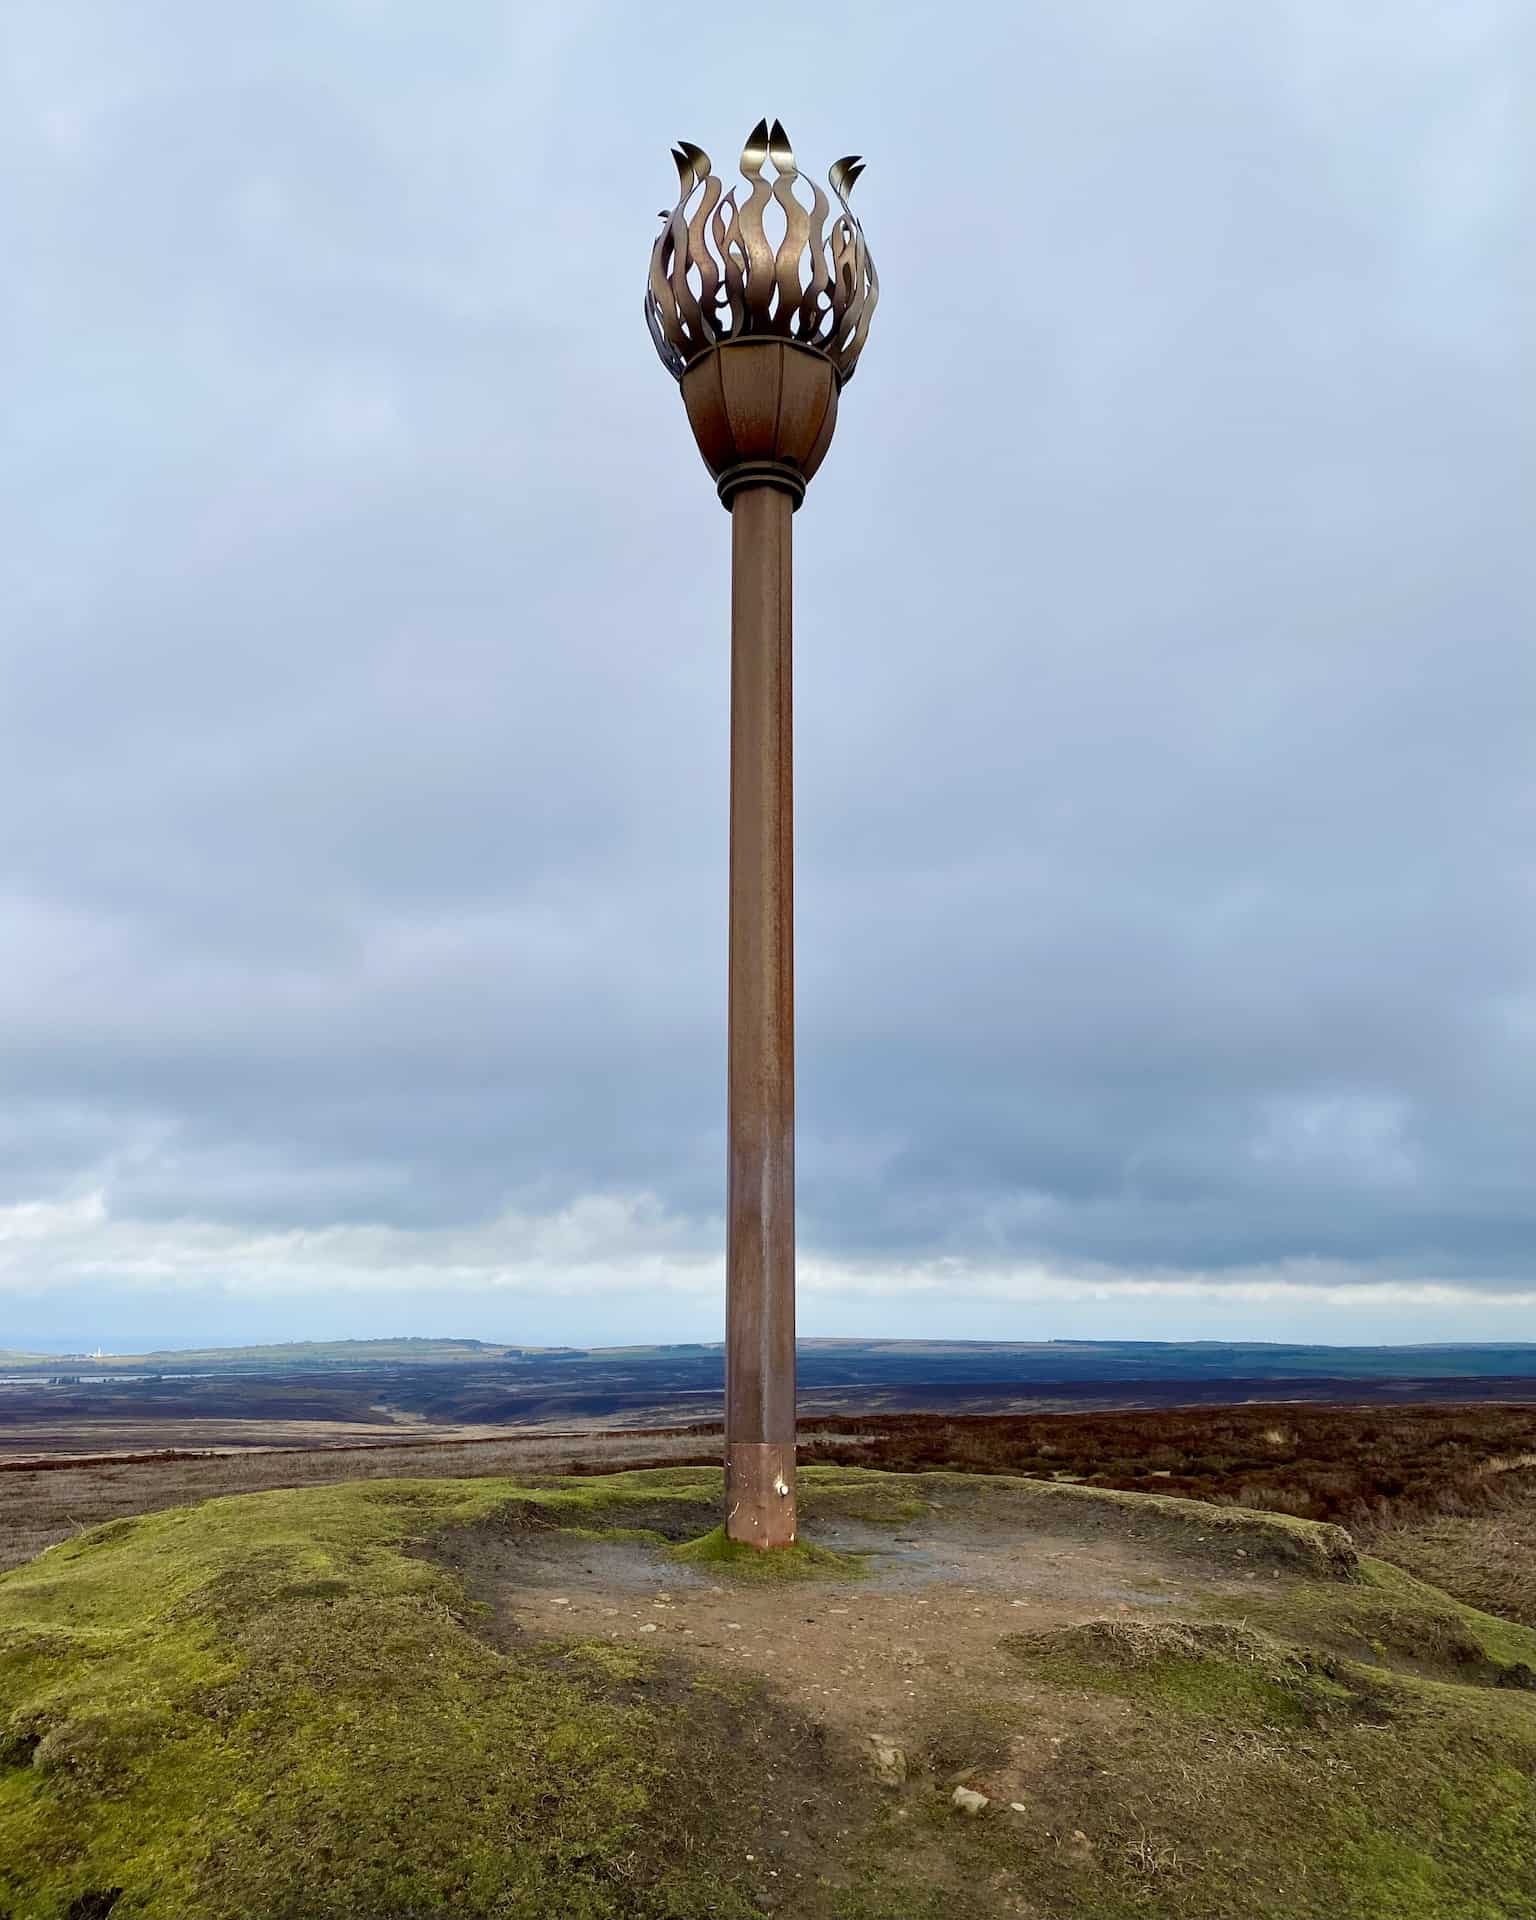 Dating back to the Roman occupation of Britain, beacon systems have been an indispensable element of the nation's communication and defence strategies.